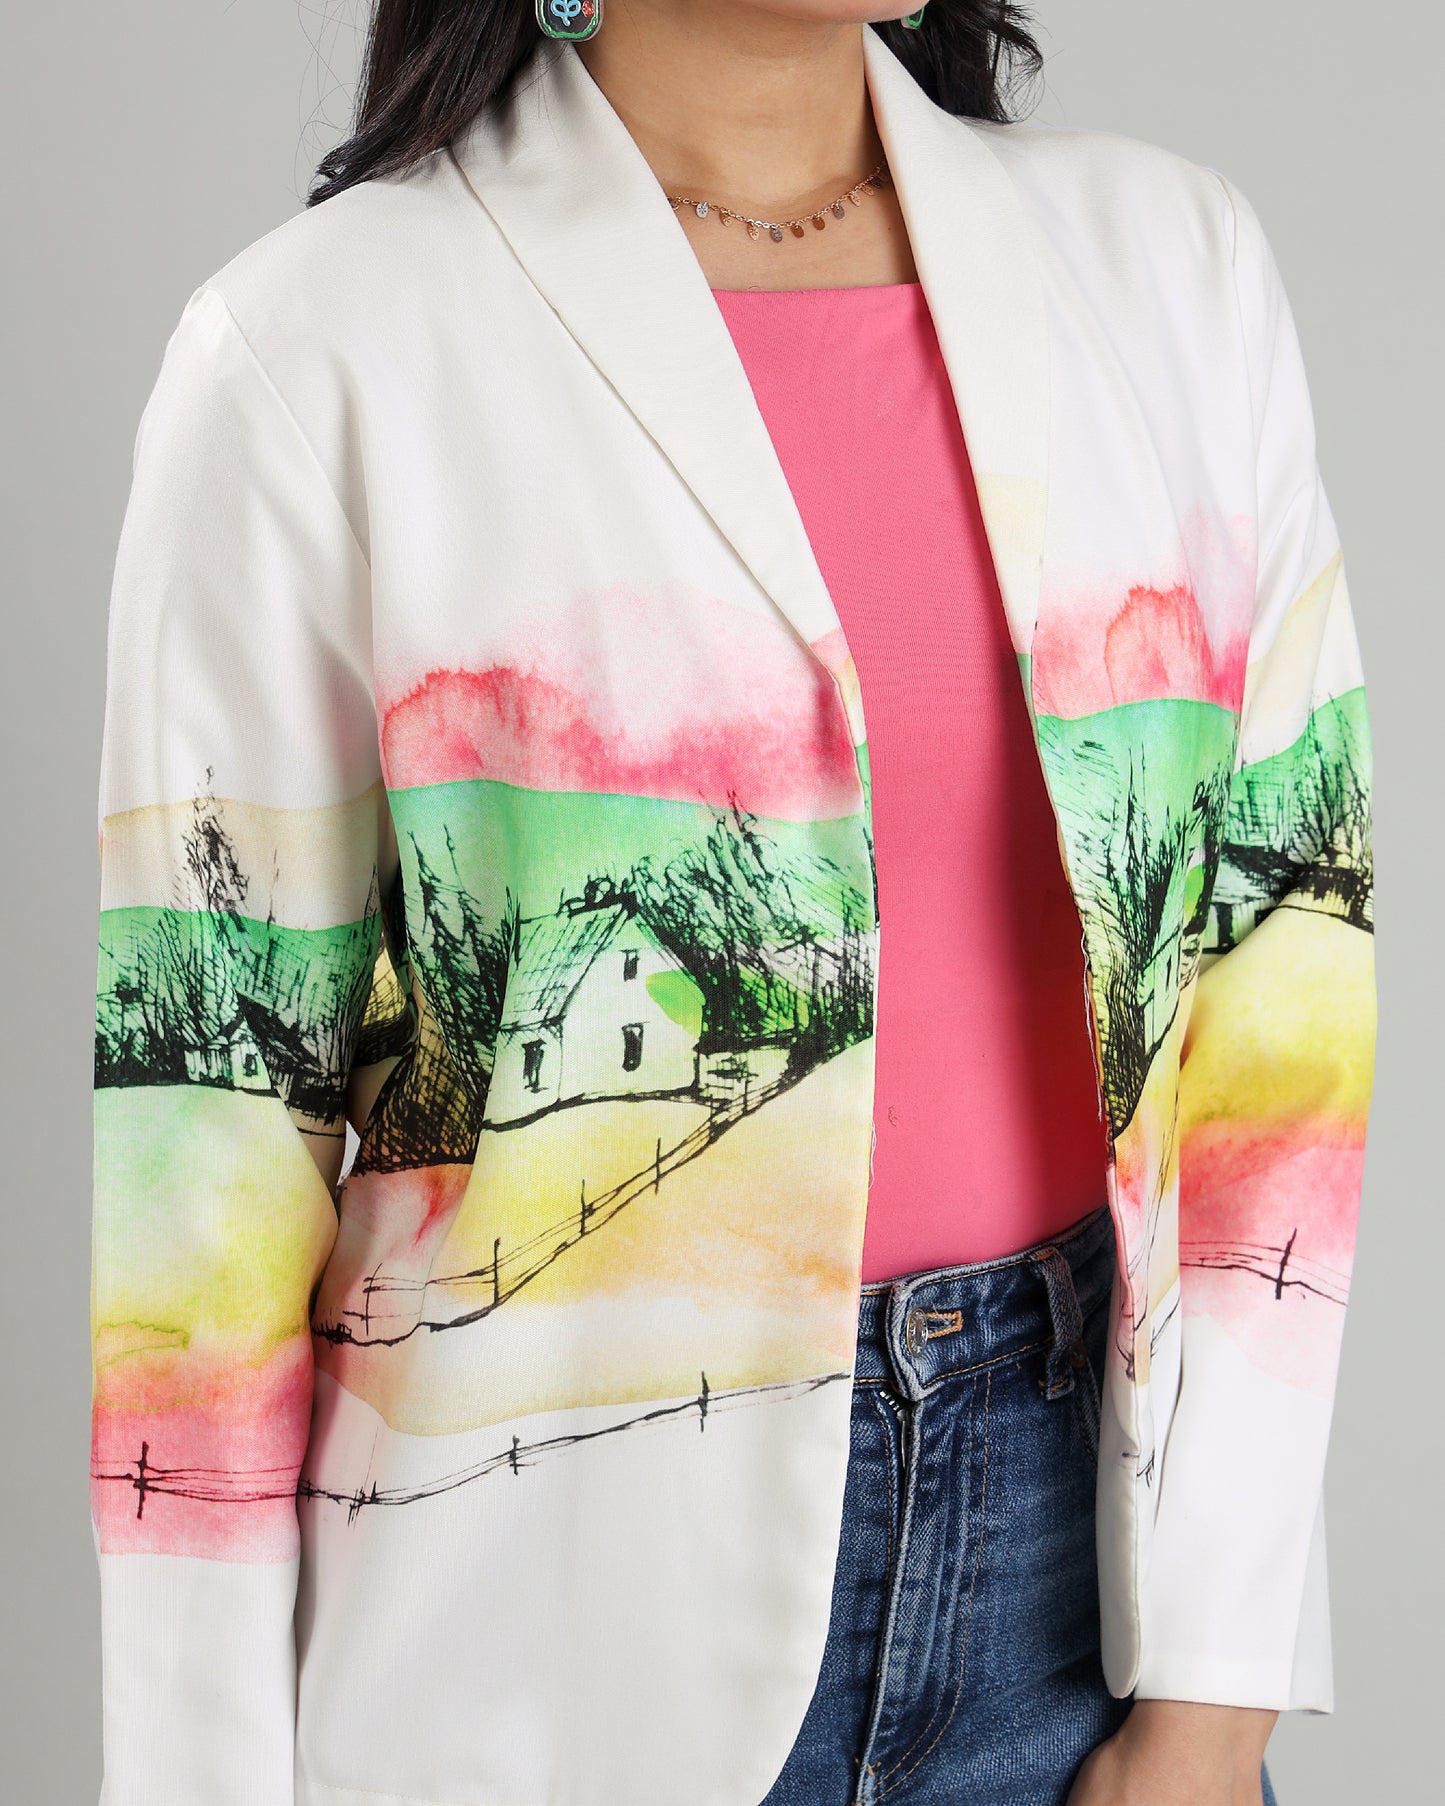 Turn Heads In This White Statement Jacket